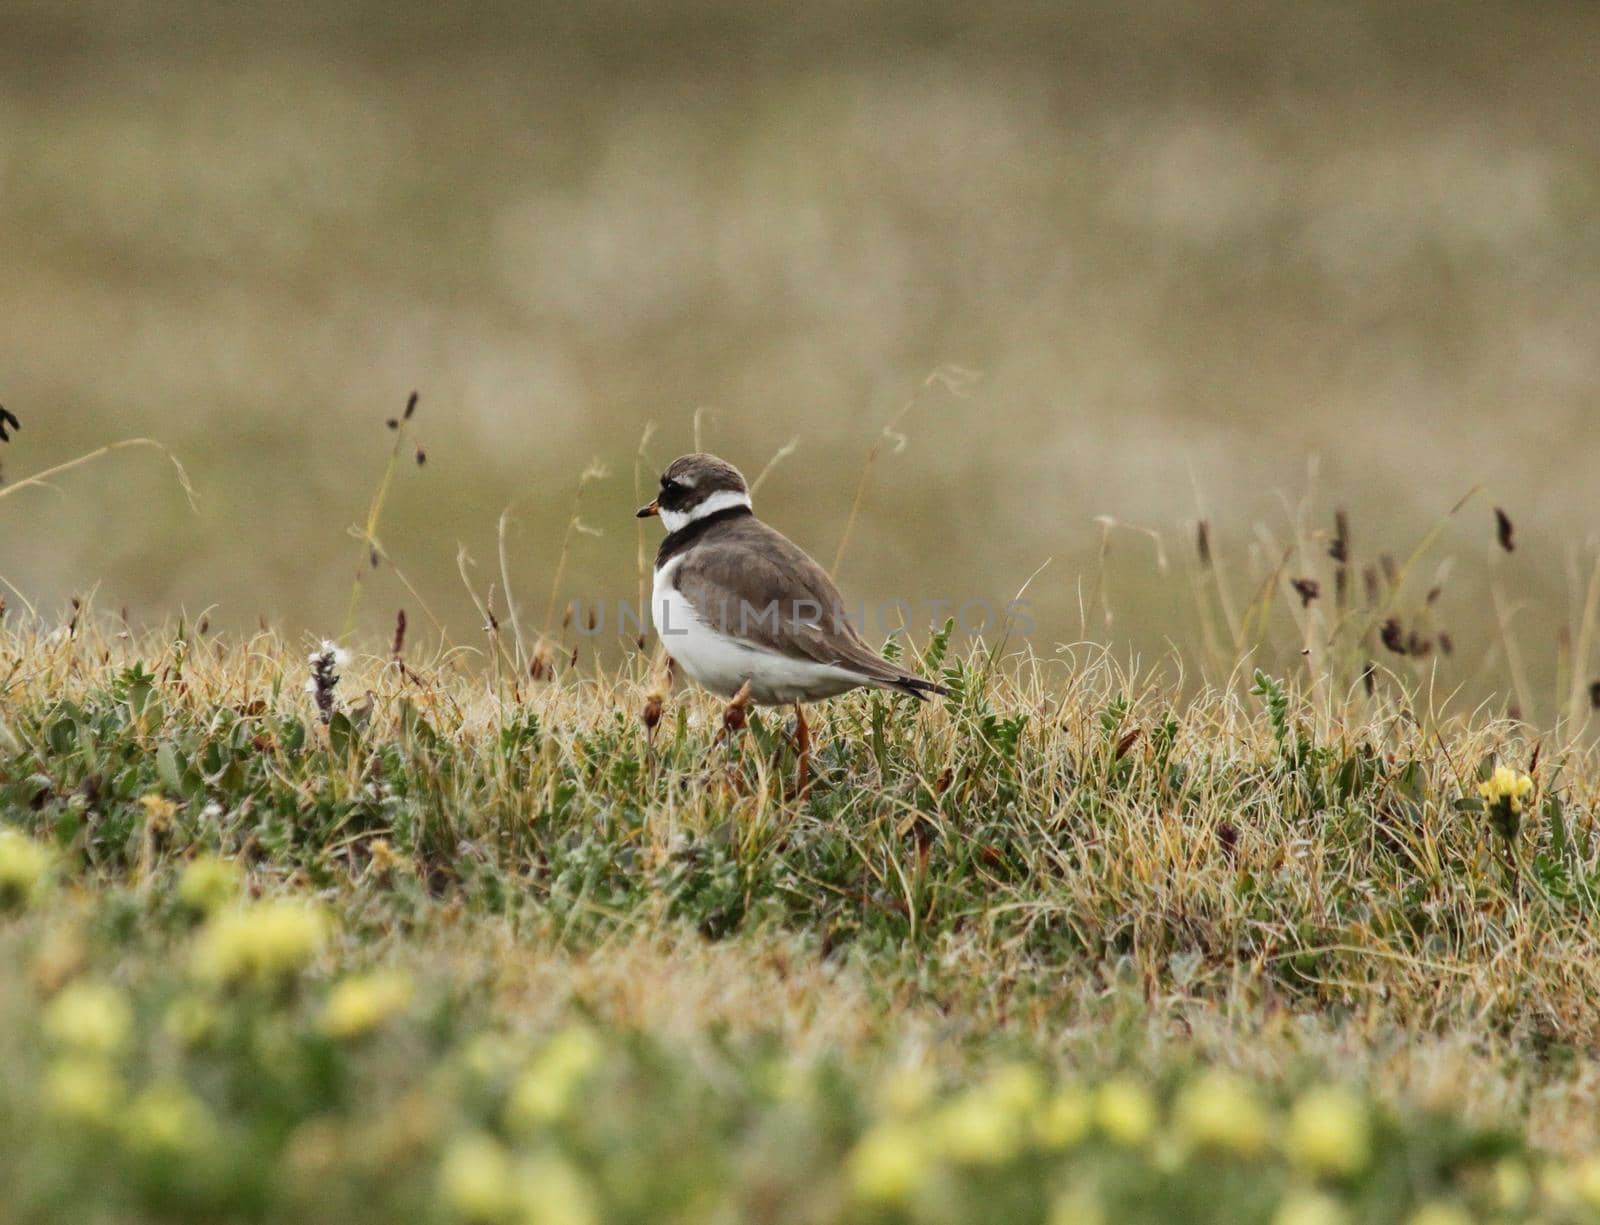 Common ringed plover walking along a grassy tundra in Canada's arctic. Near Pond Inlet, Nunavut